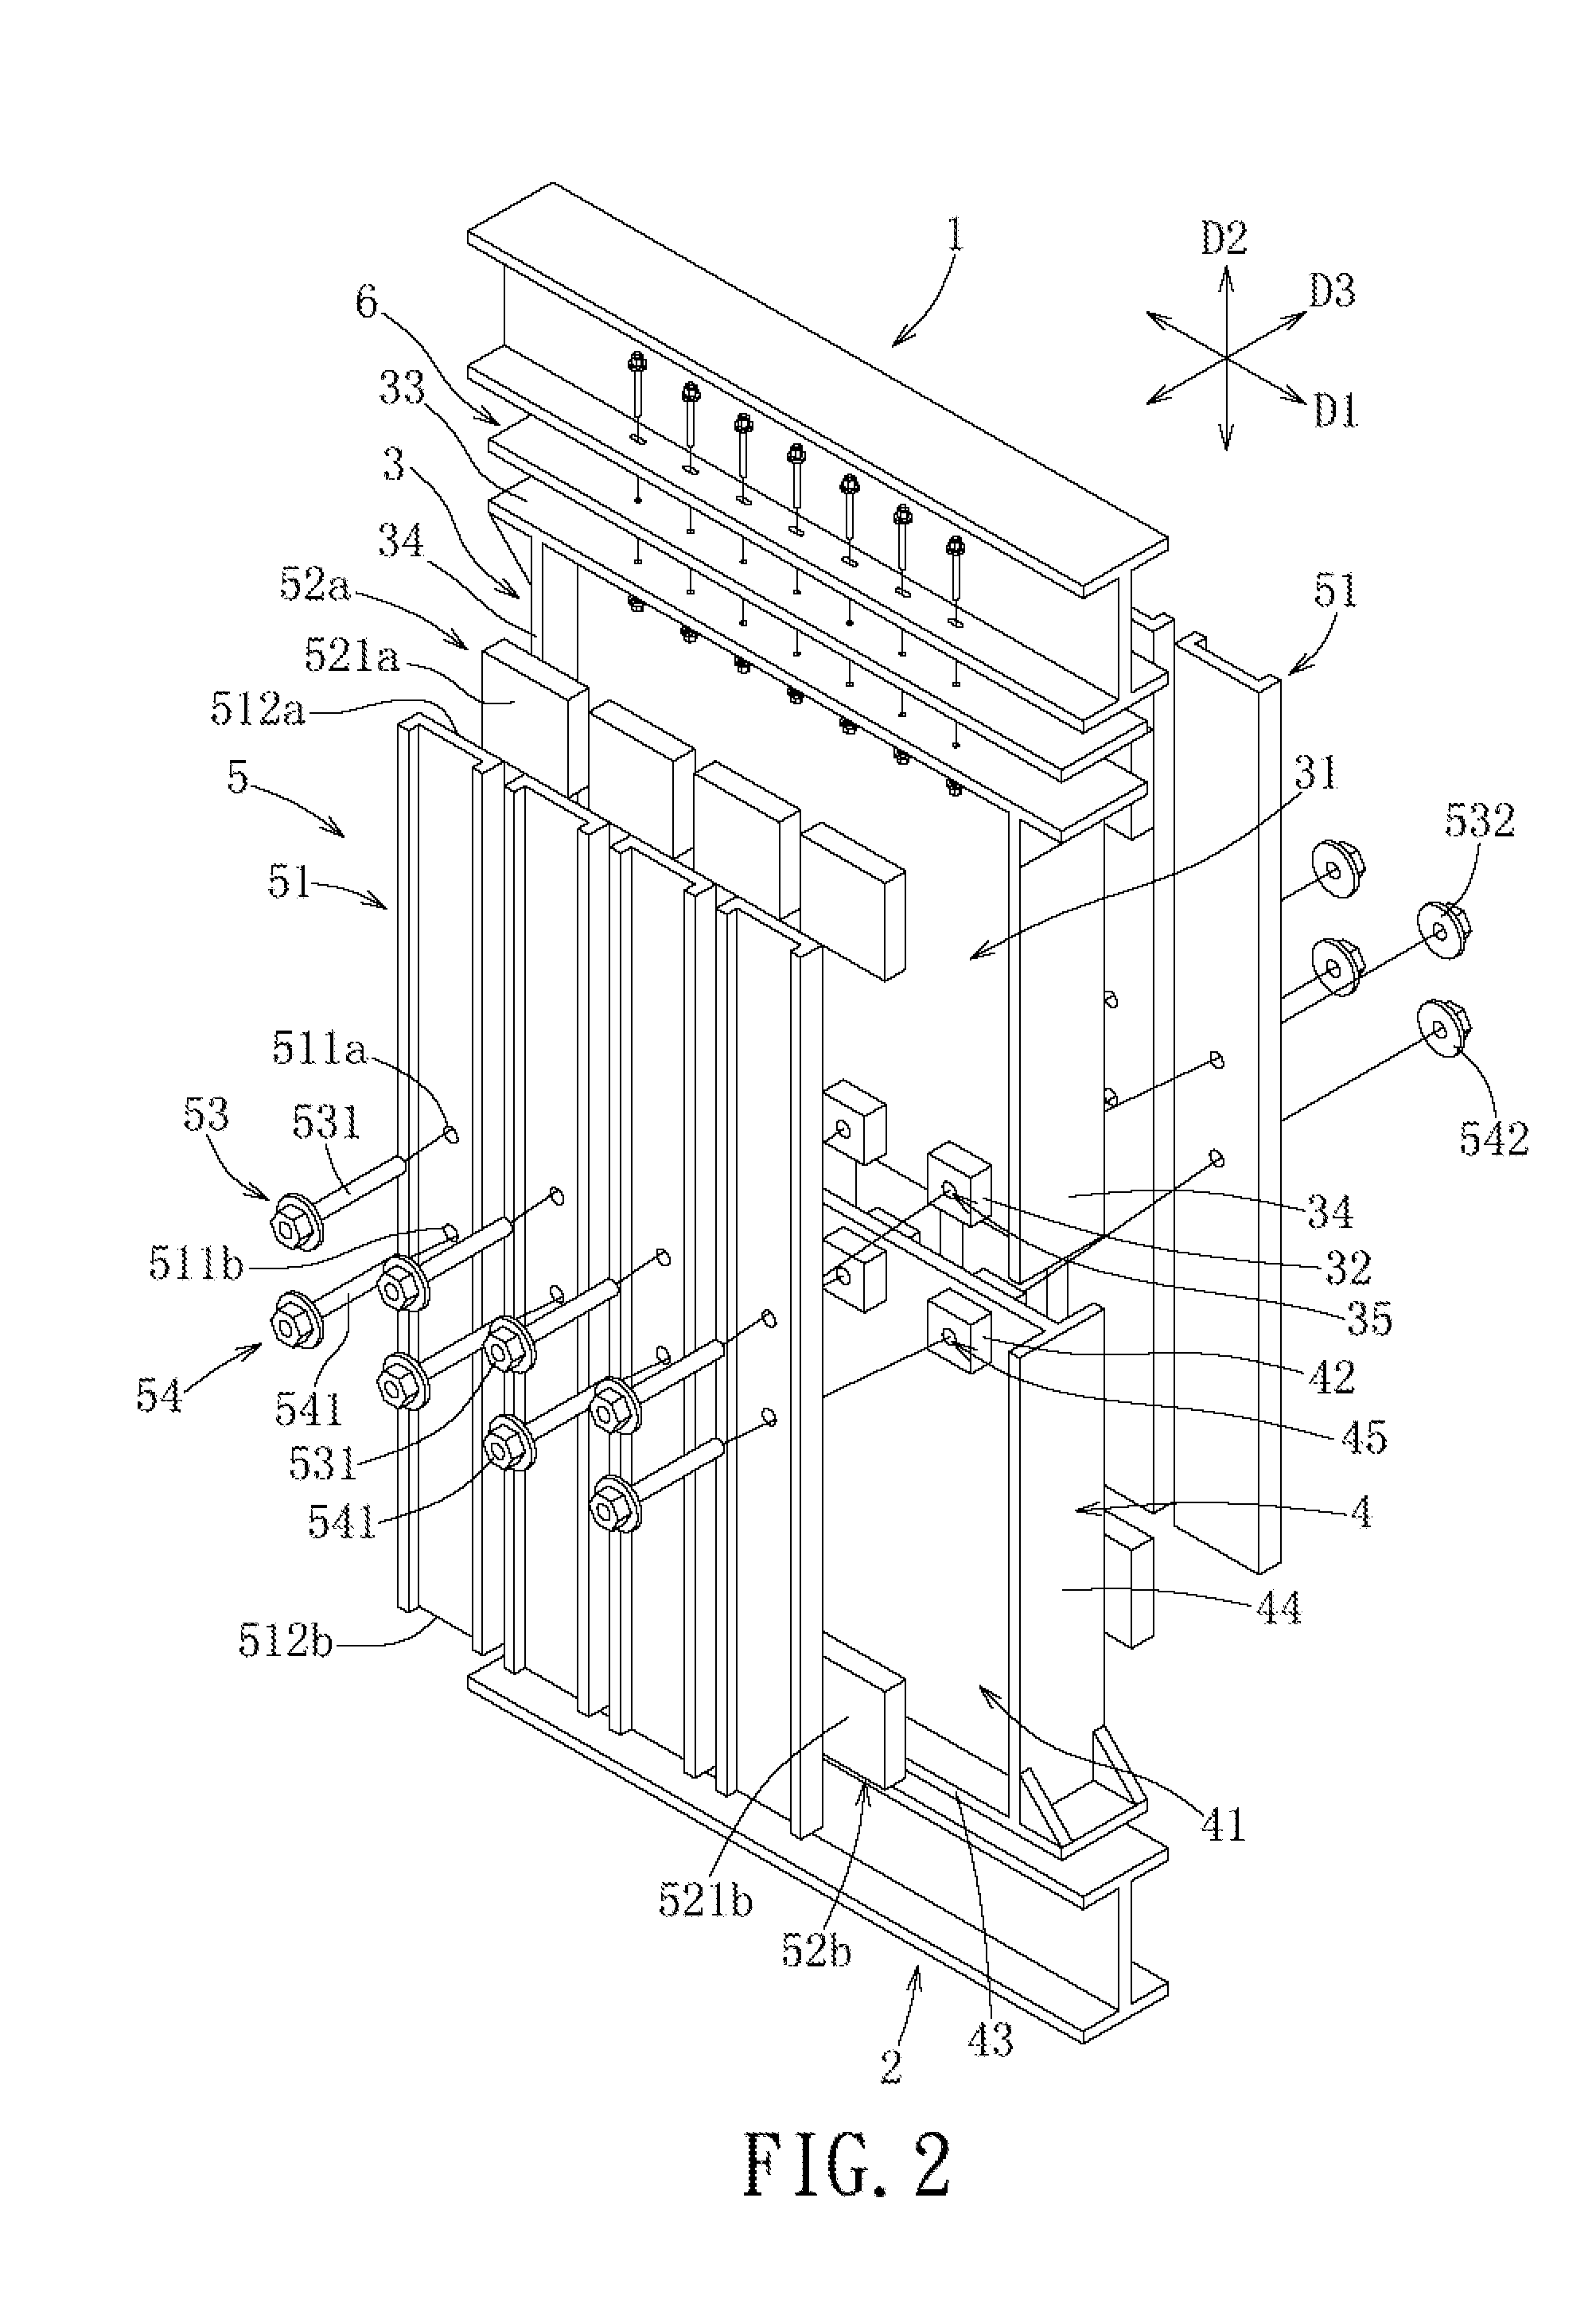 Lever viscoelastic damping wall assembly